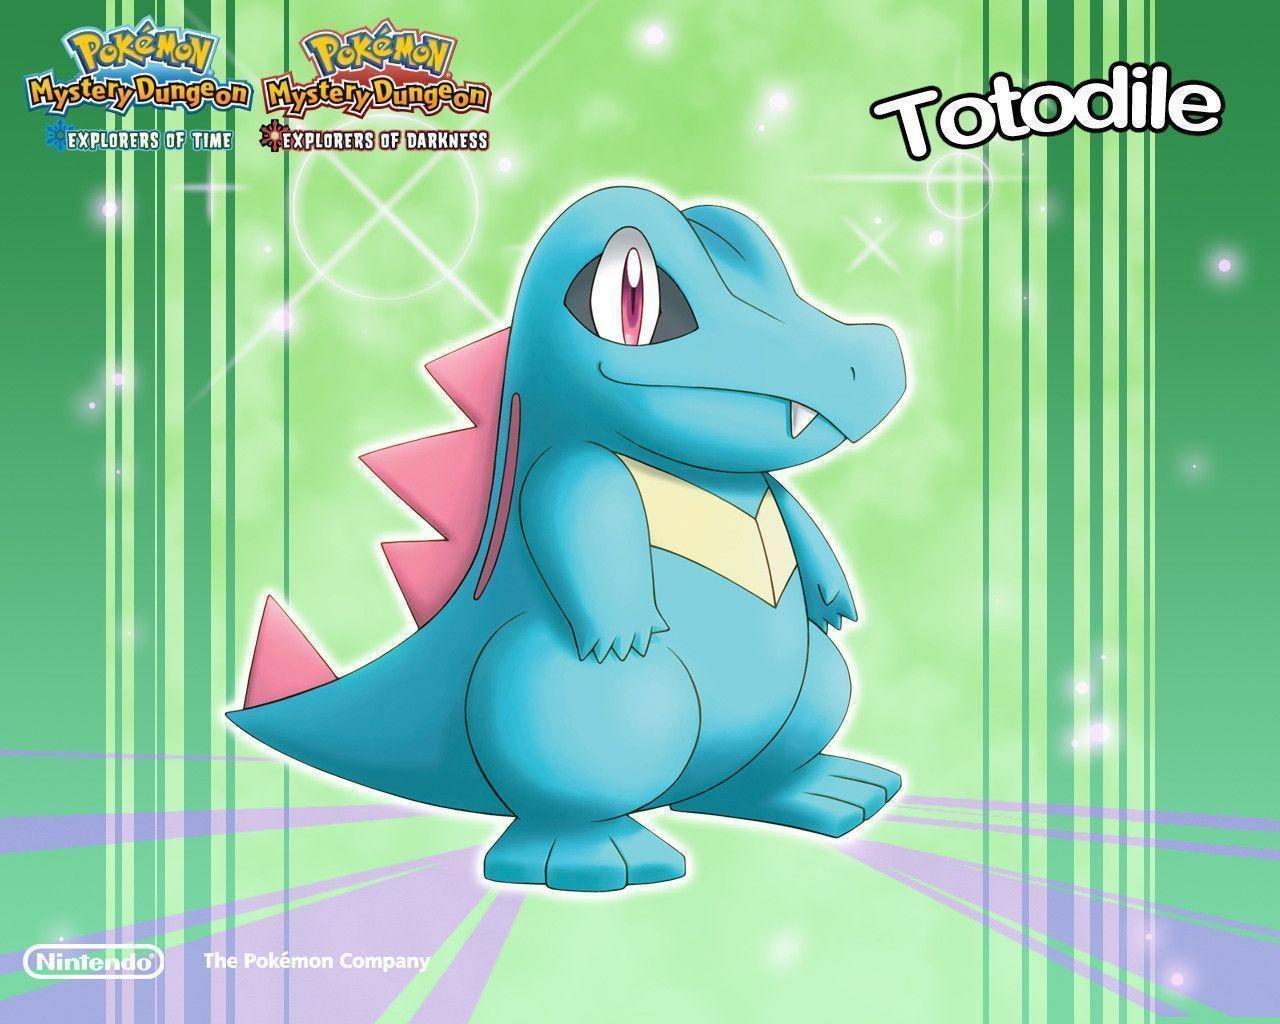 Latest Screens, Pokemon Mystery Dungeon: Explorers of Time Wallpaper